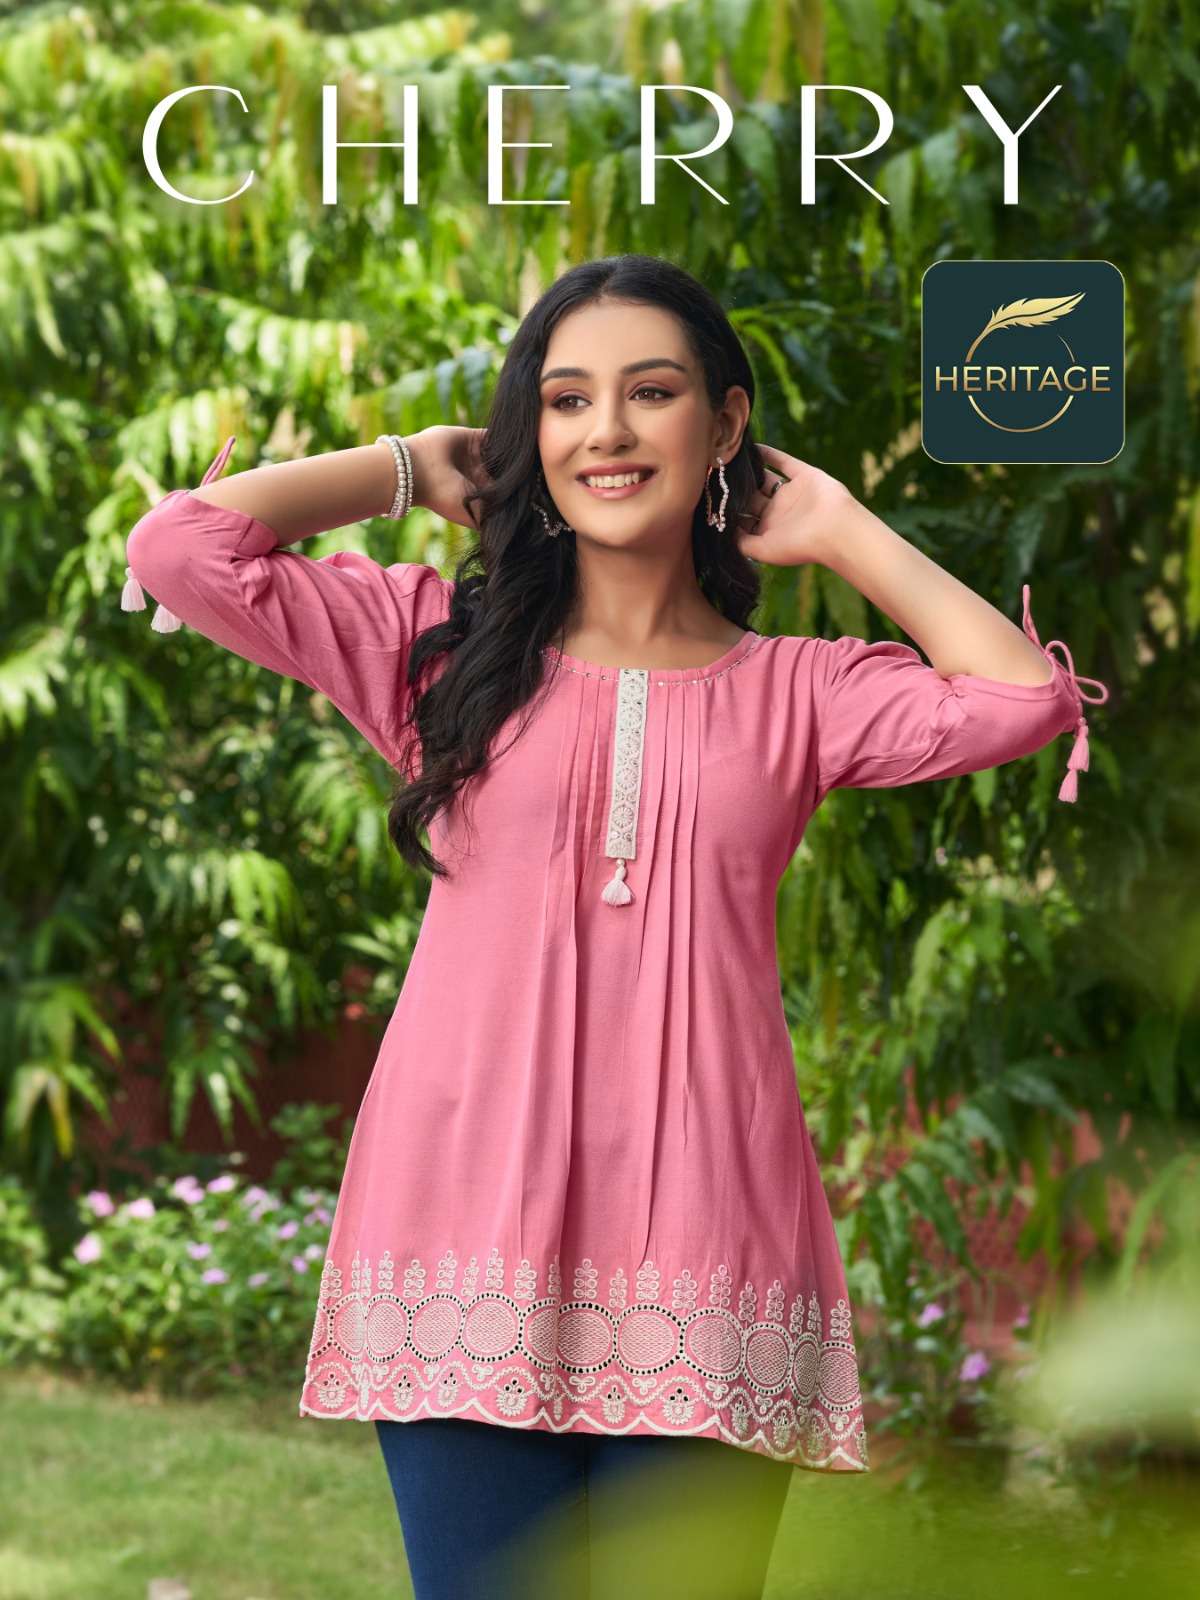 CHERRY HIGH QUALITY RAYON DESIGNER SHORT KURTI WITH HEAVY SCHIFLI EMBROIDERY AND HANDWORK BY HARITAG...